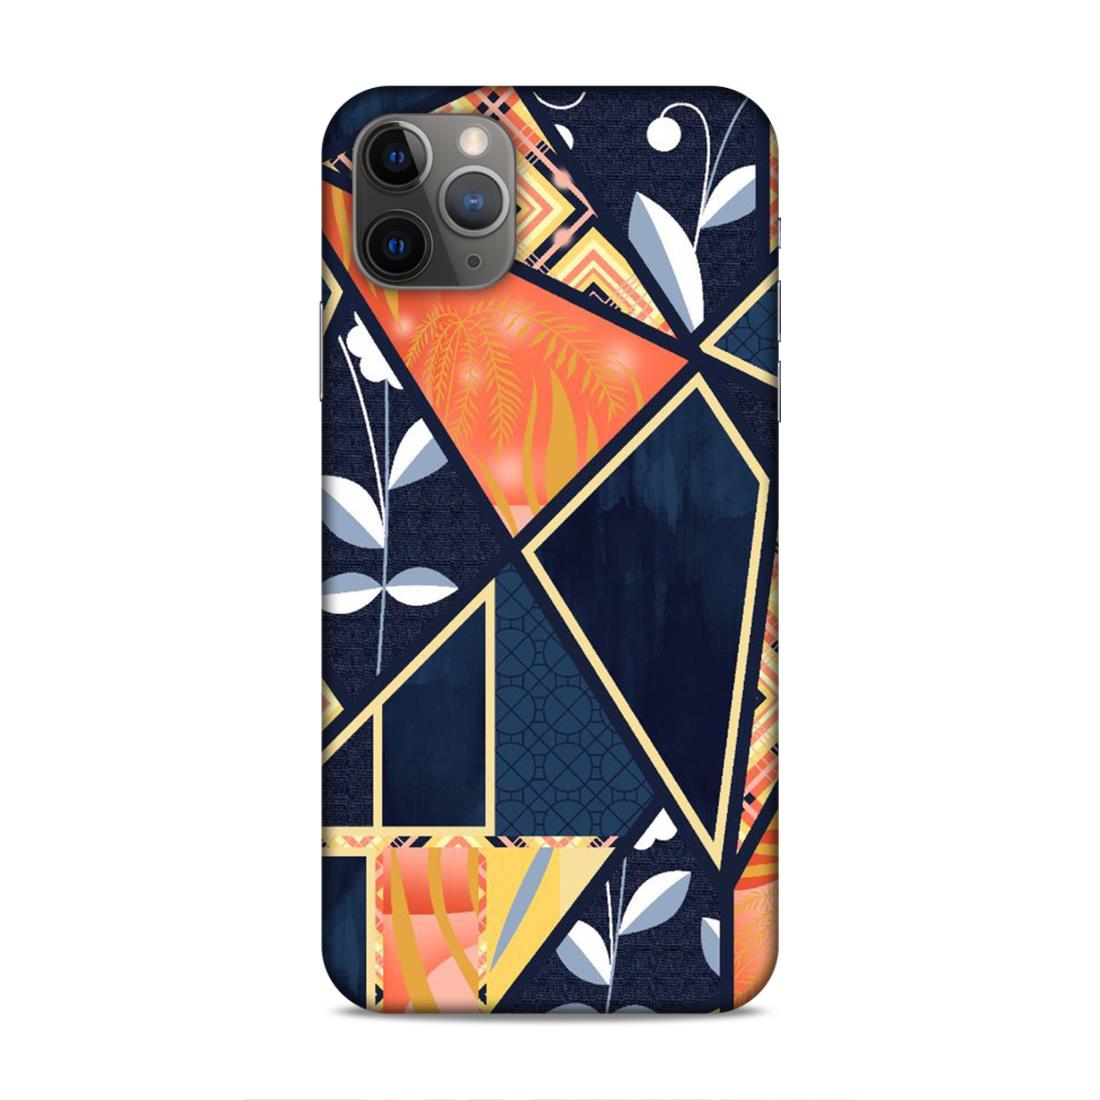 Floral Textile Pattern Hard Back Case For Apple iPhone 11 Pro Max